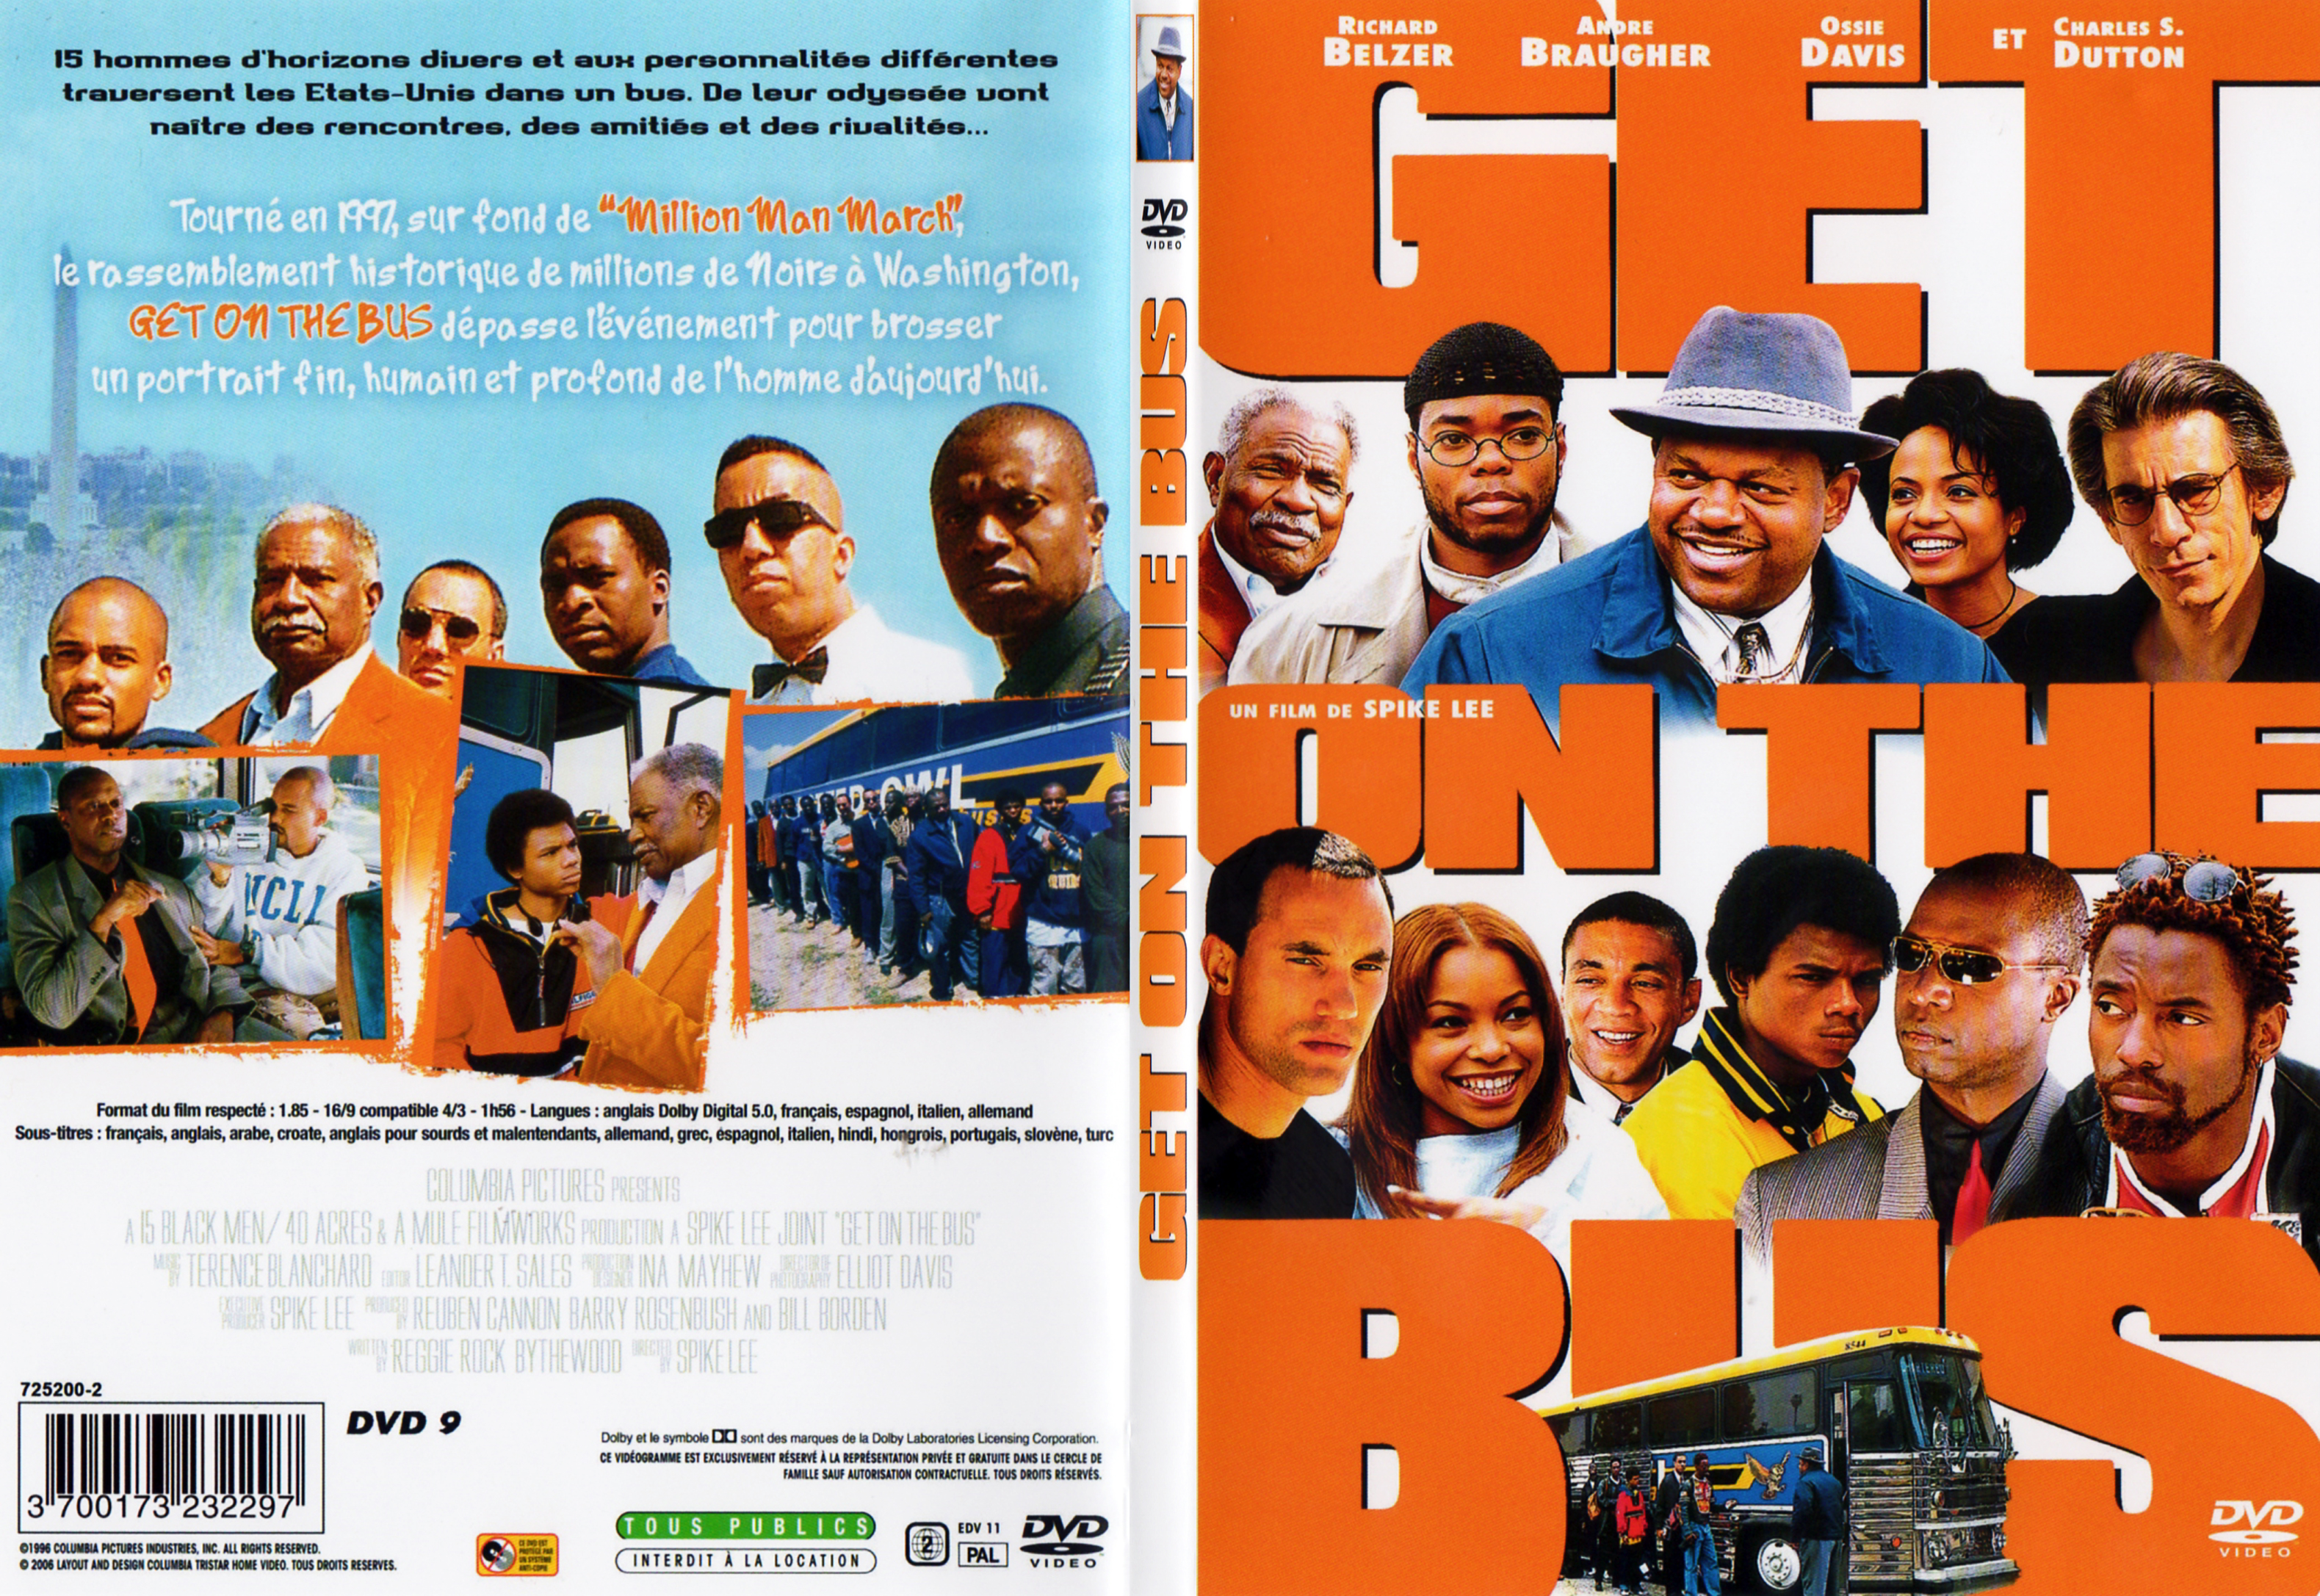 Jaquette DVD Get on the bus - SLIM